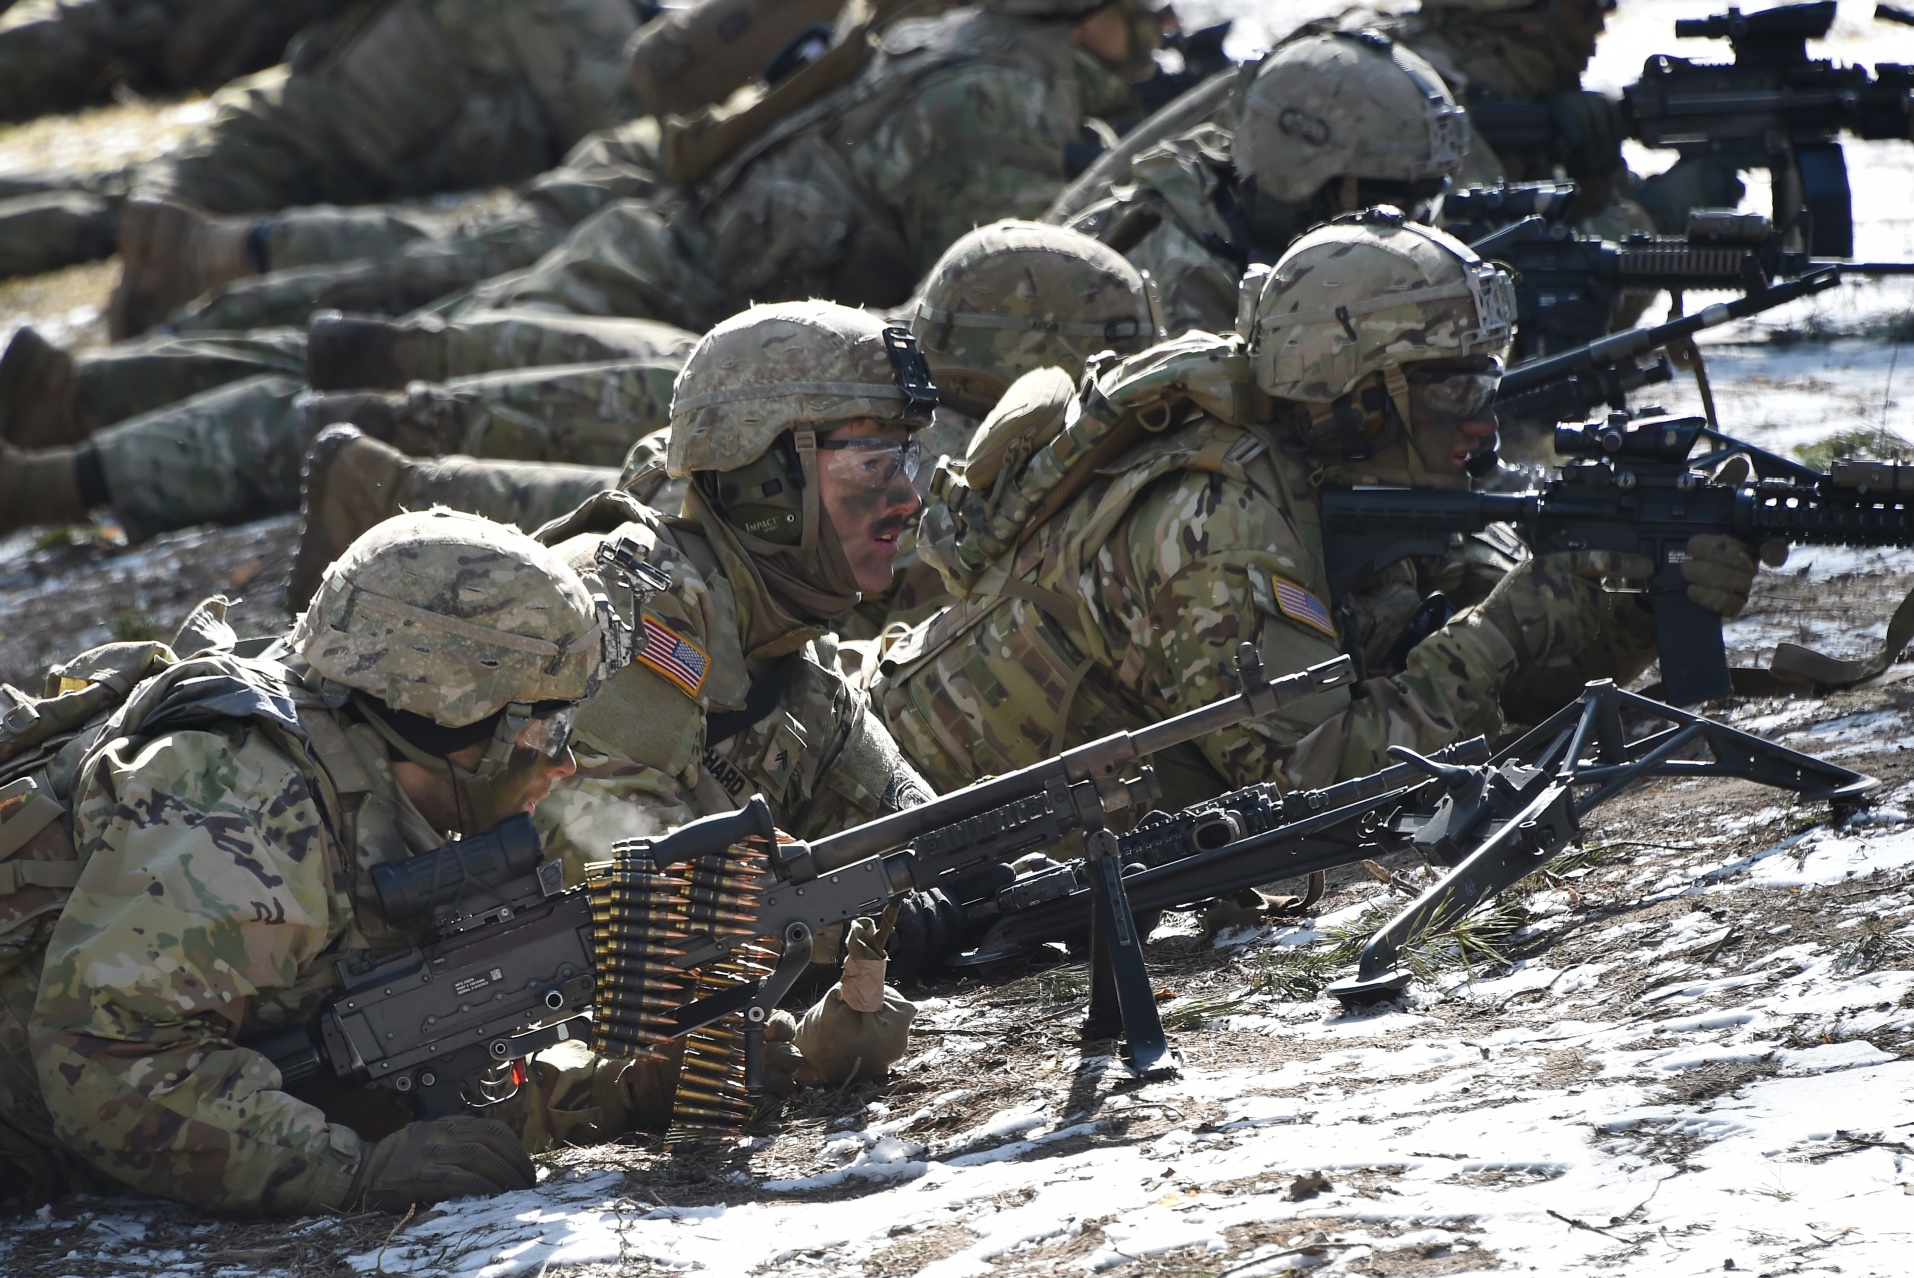 U.S. Army Paratroopers with Company A, 2nd Battalion, 503rd Infantry Regiment, 173rd Airborne Brigade conduct a Platoon Level Live Fire Exercise at the 7th Army Training Command’s Grafenwoehr Training Area, Germany